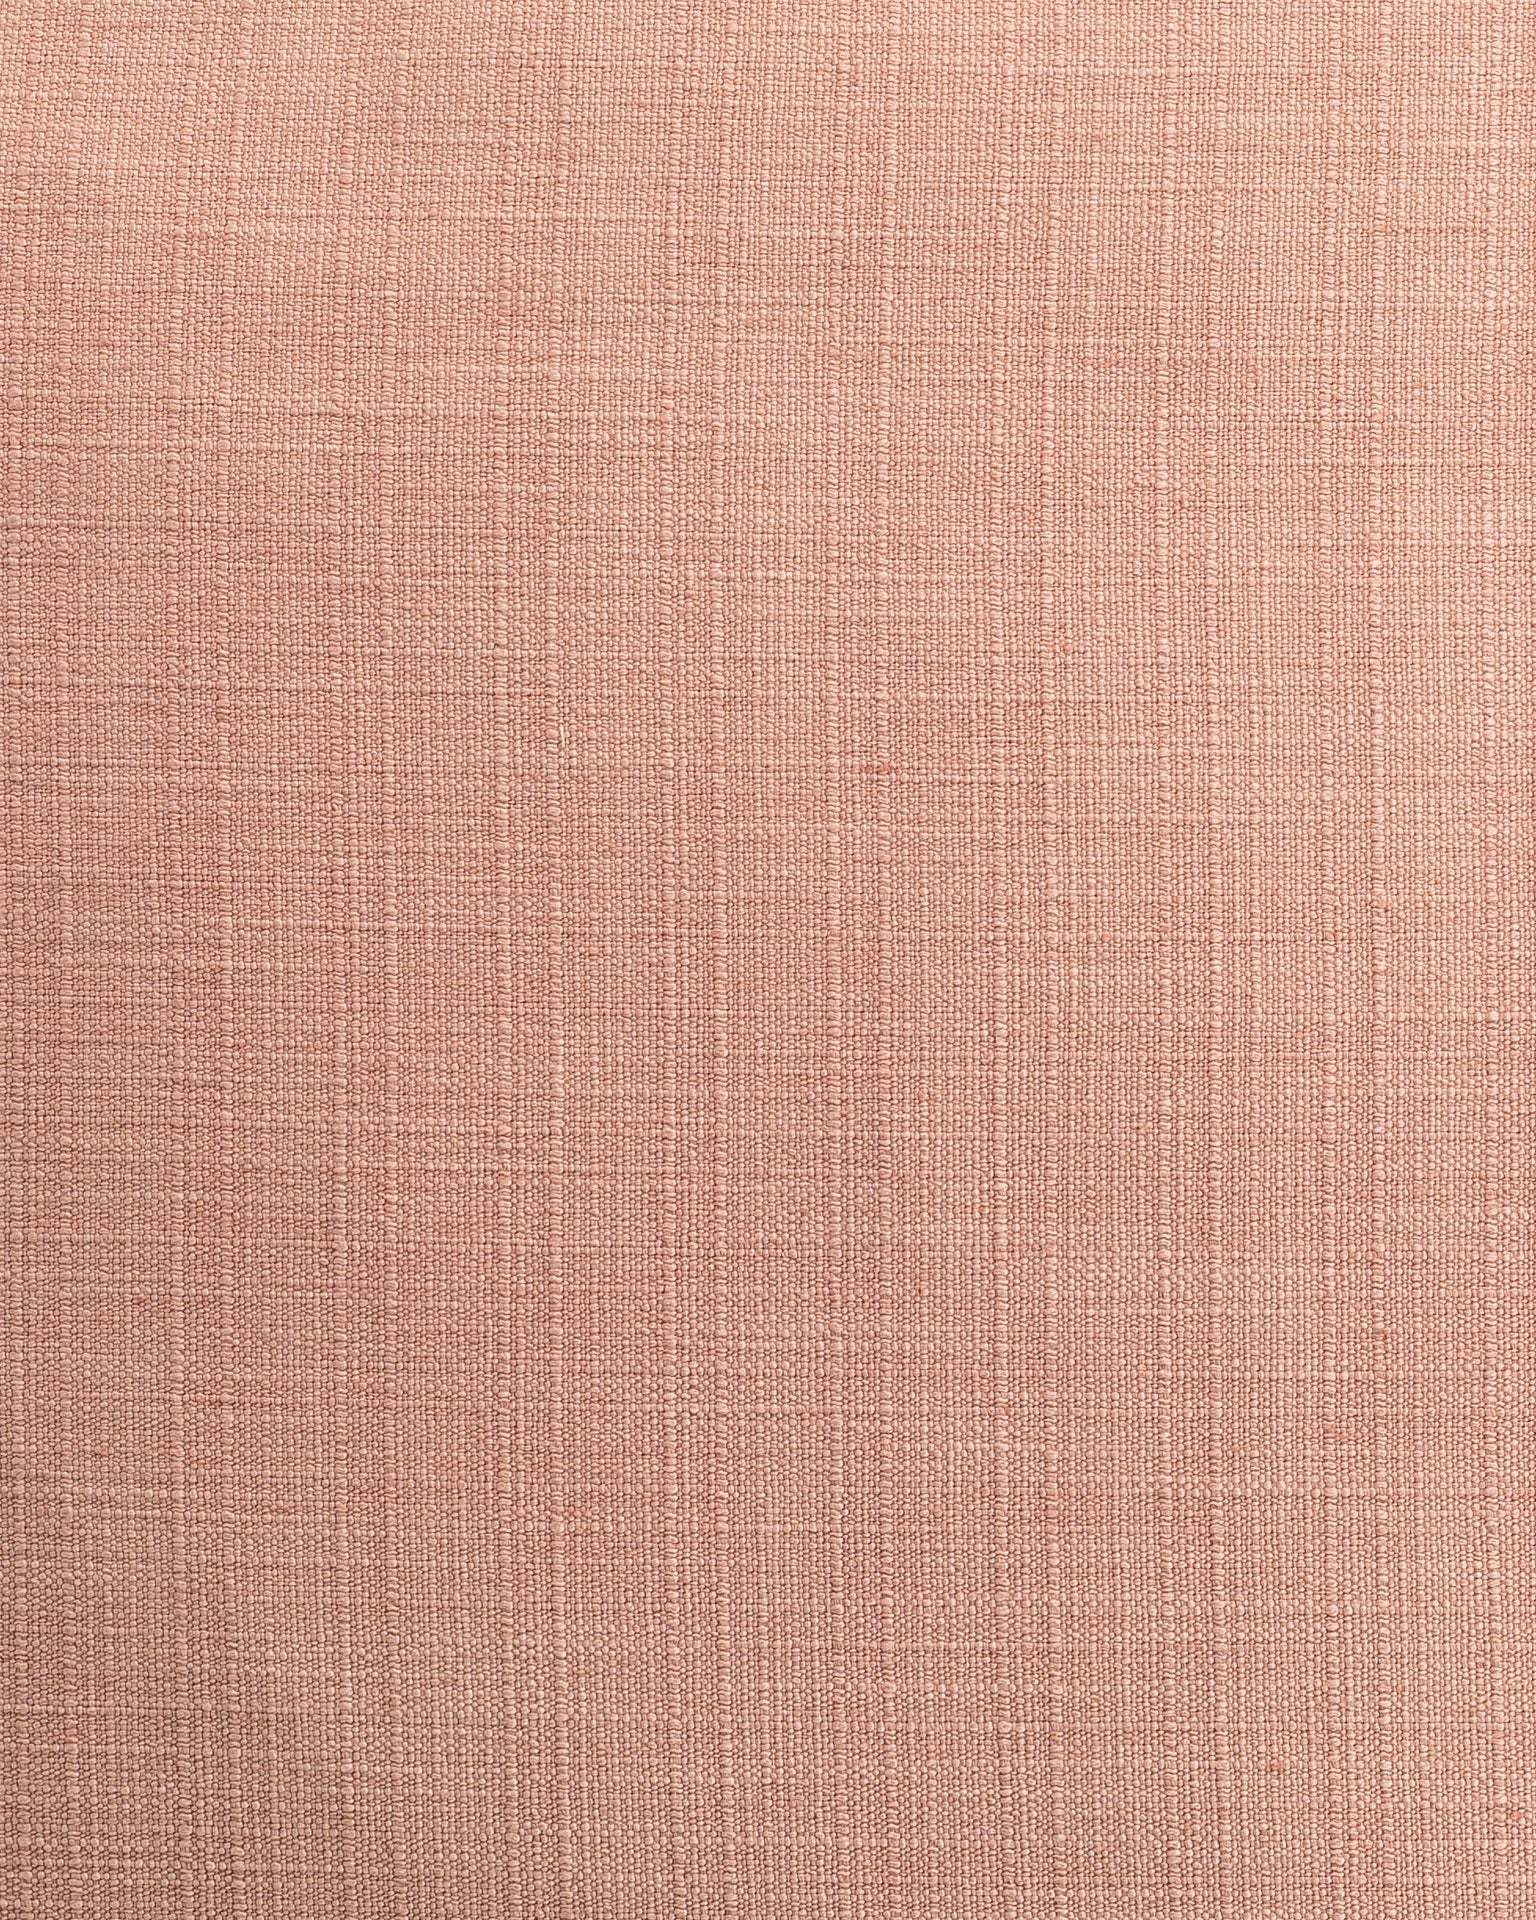 Close-up texture of a light pink fabric with a subtle, linear weave pattern, reminiscent of a bungalow in Scottsdale, Arizona featuring the Splendor Nude Pillow 26x26 by Gabby.